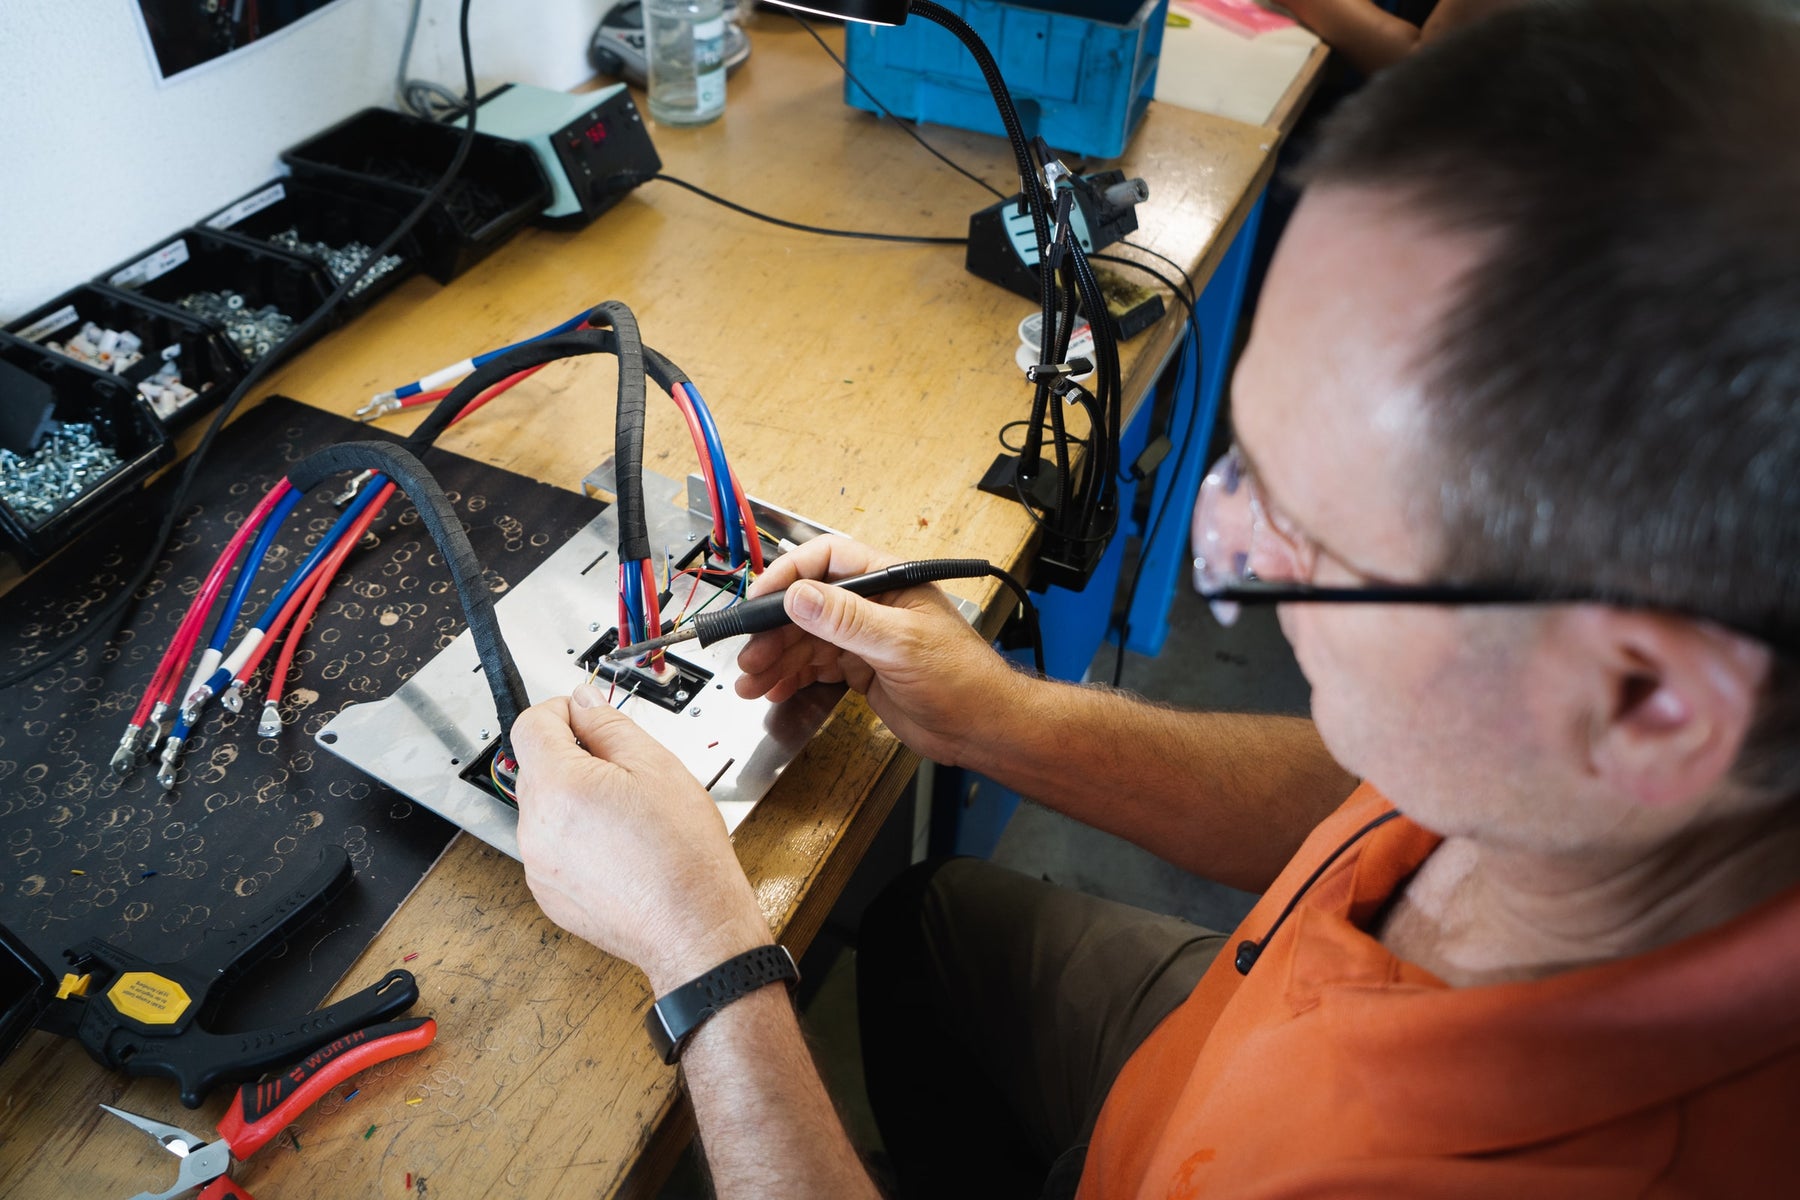 A person doing soldering work on a circuit board